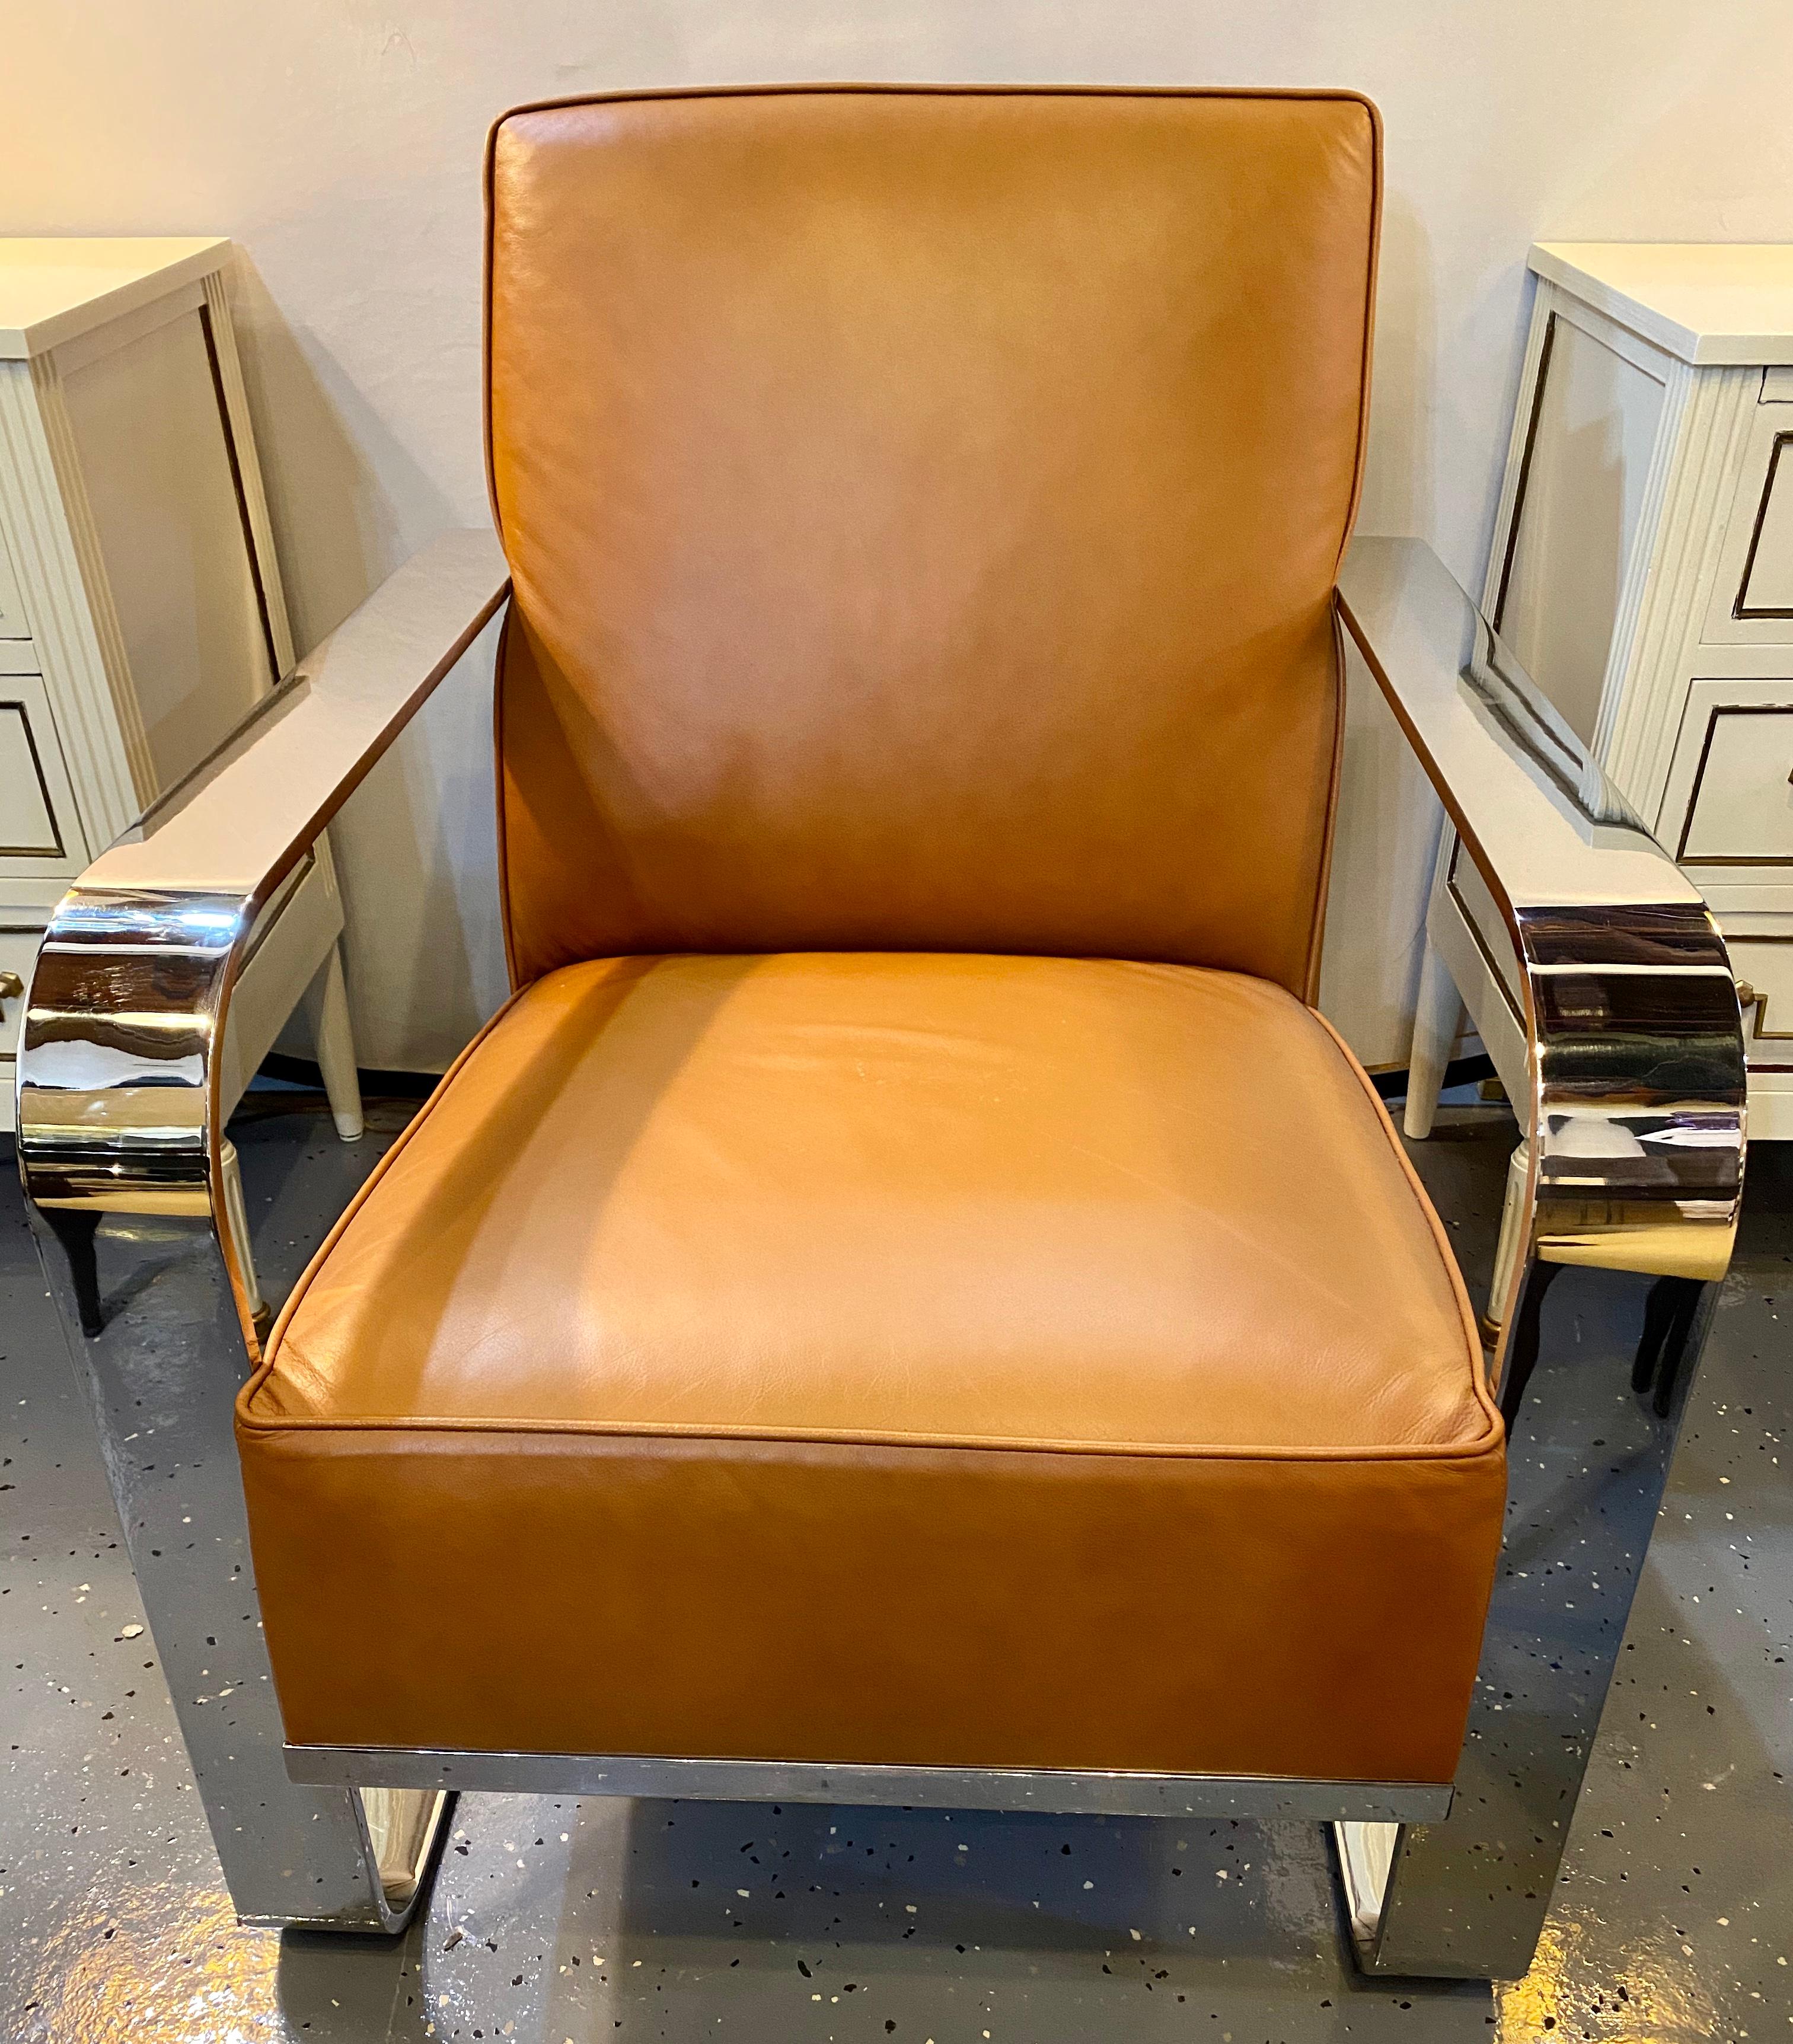 Lauren Bohemian chairs chrome and leather rockers. A pair of Lauren lounge chairs with heavy chrome detailing in the arms, legs and the back. Beautiful high grade distressed brown leather.
Very comfortable with a slight bounce like a rocking chair.